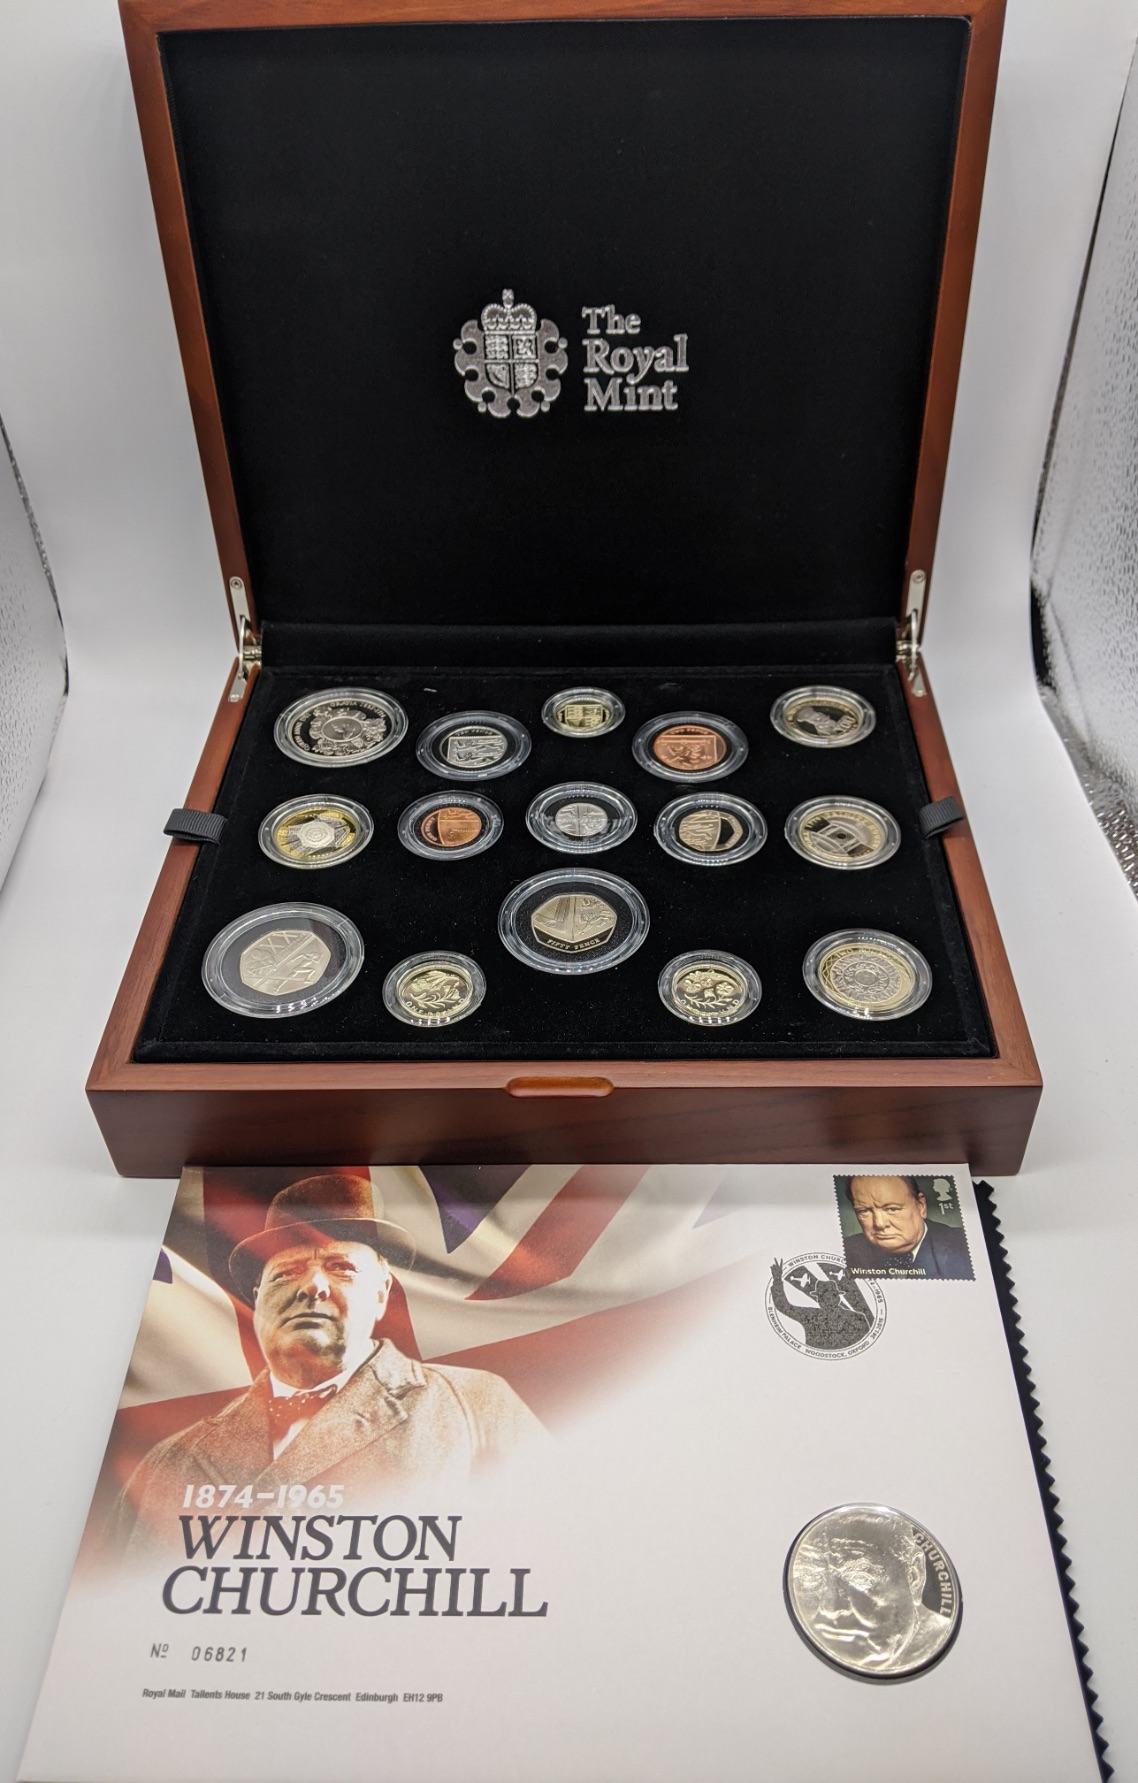 The 2014 United Kingdom Premium Proof Coins Set, with box and papers, together with a Winston